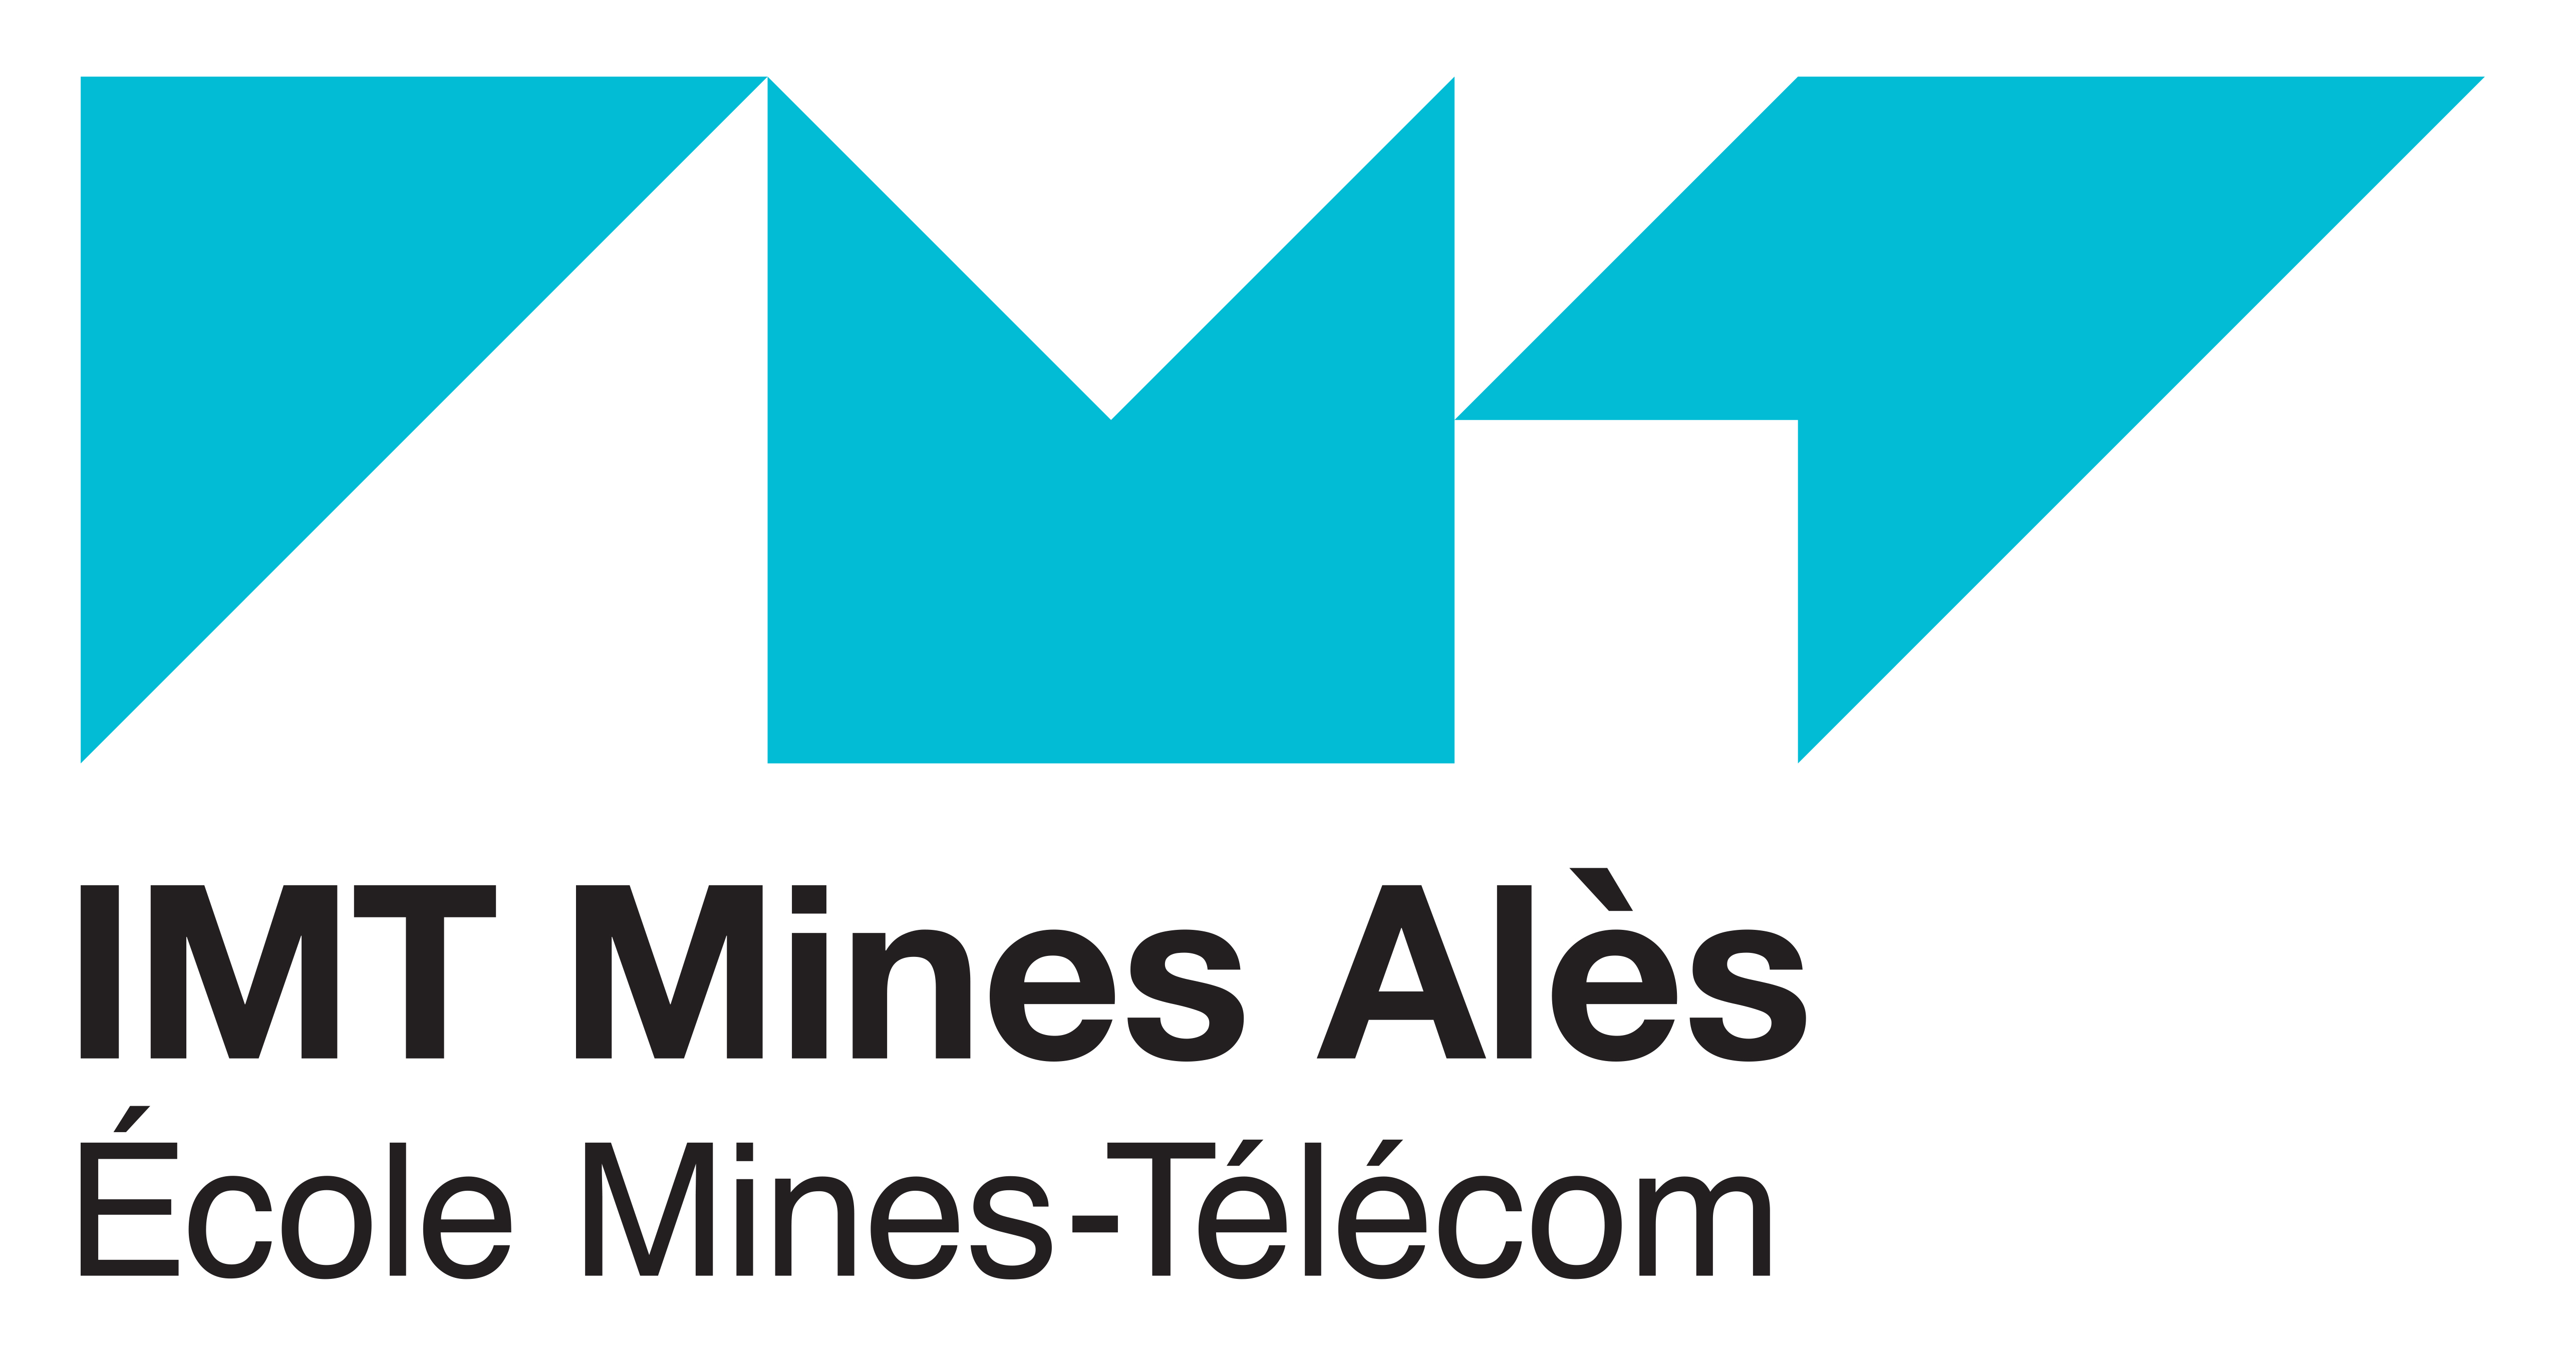 Imt mines ales